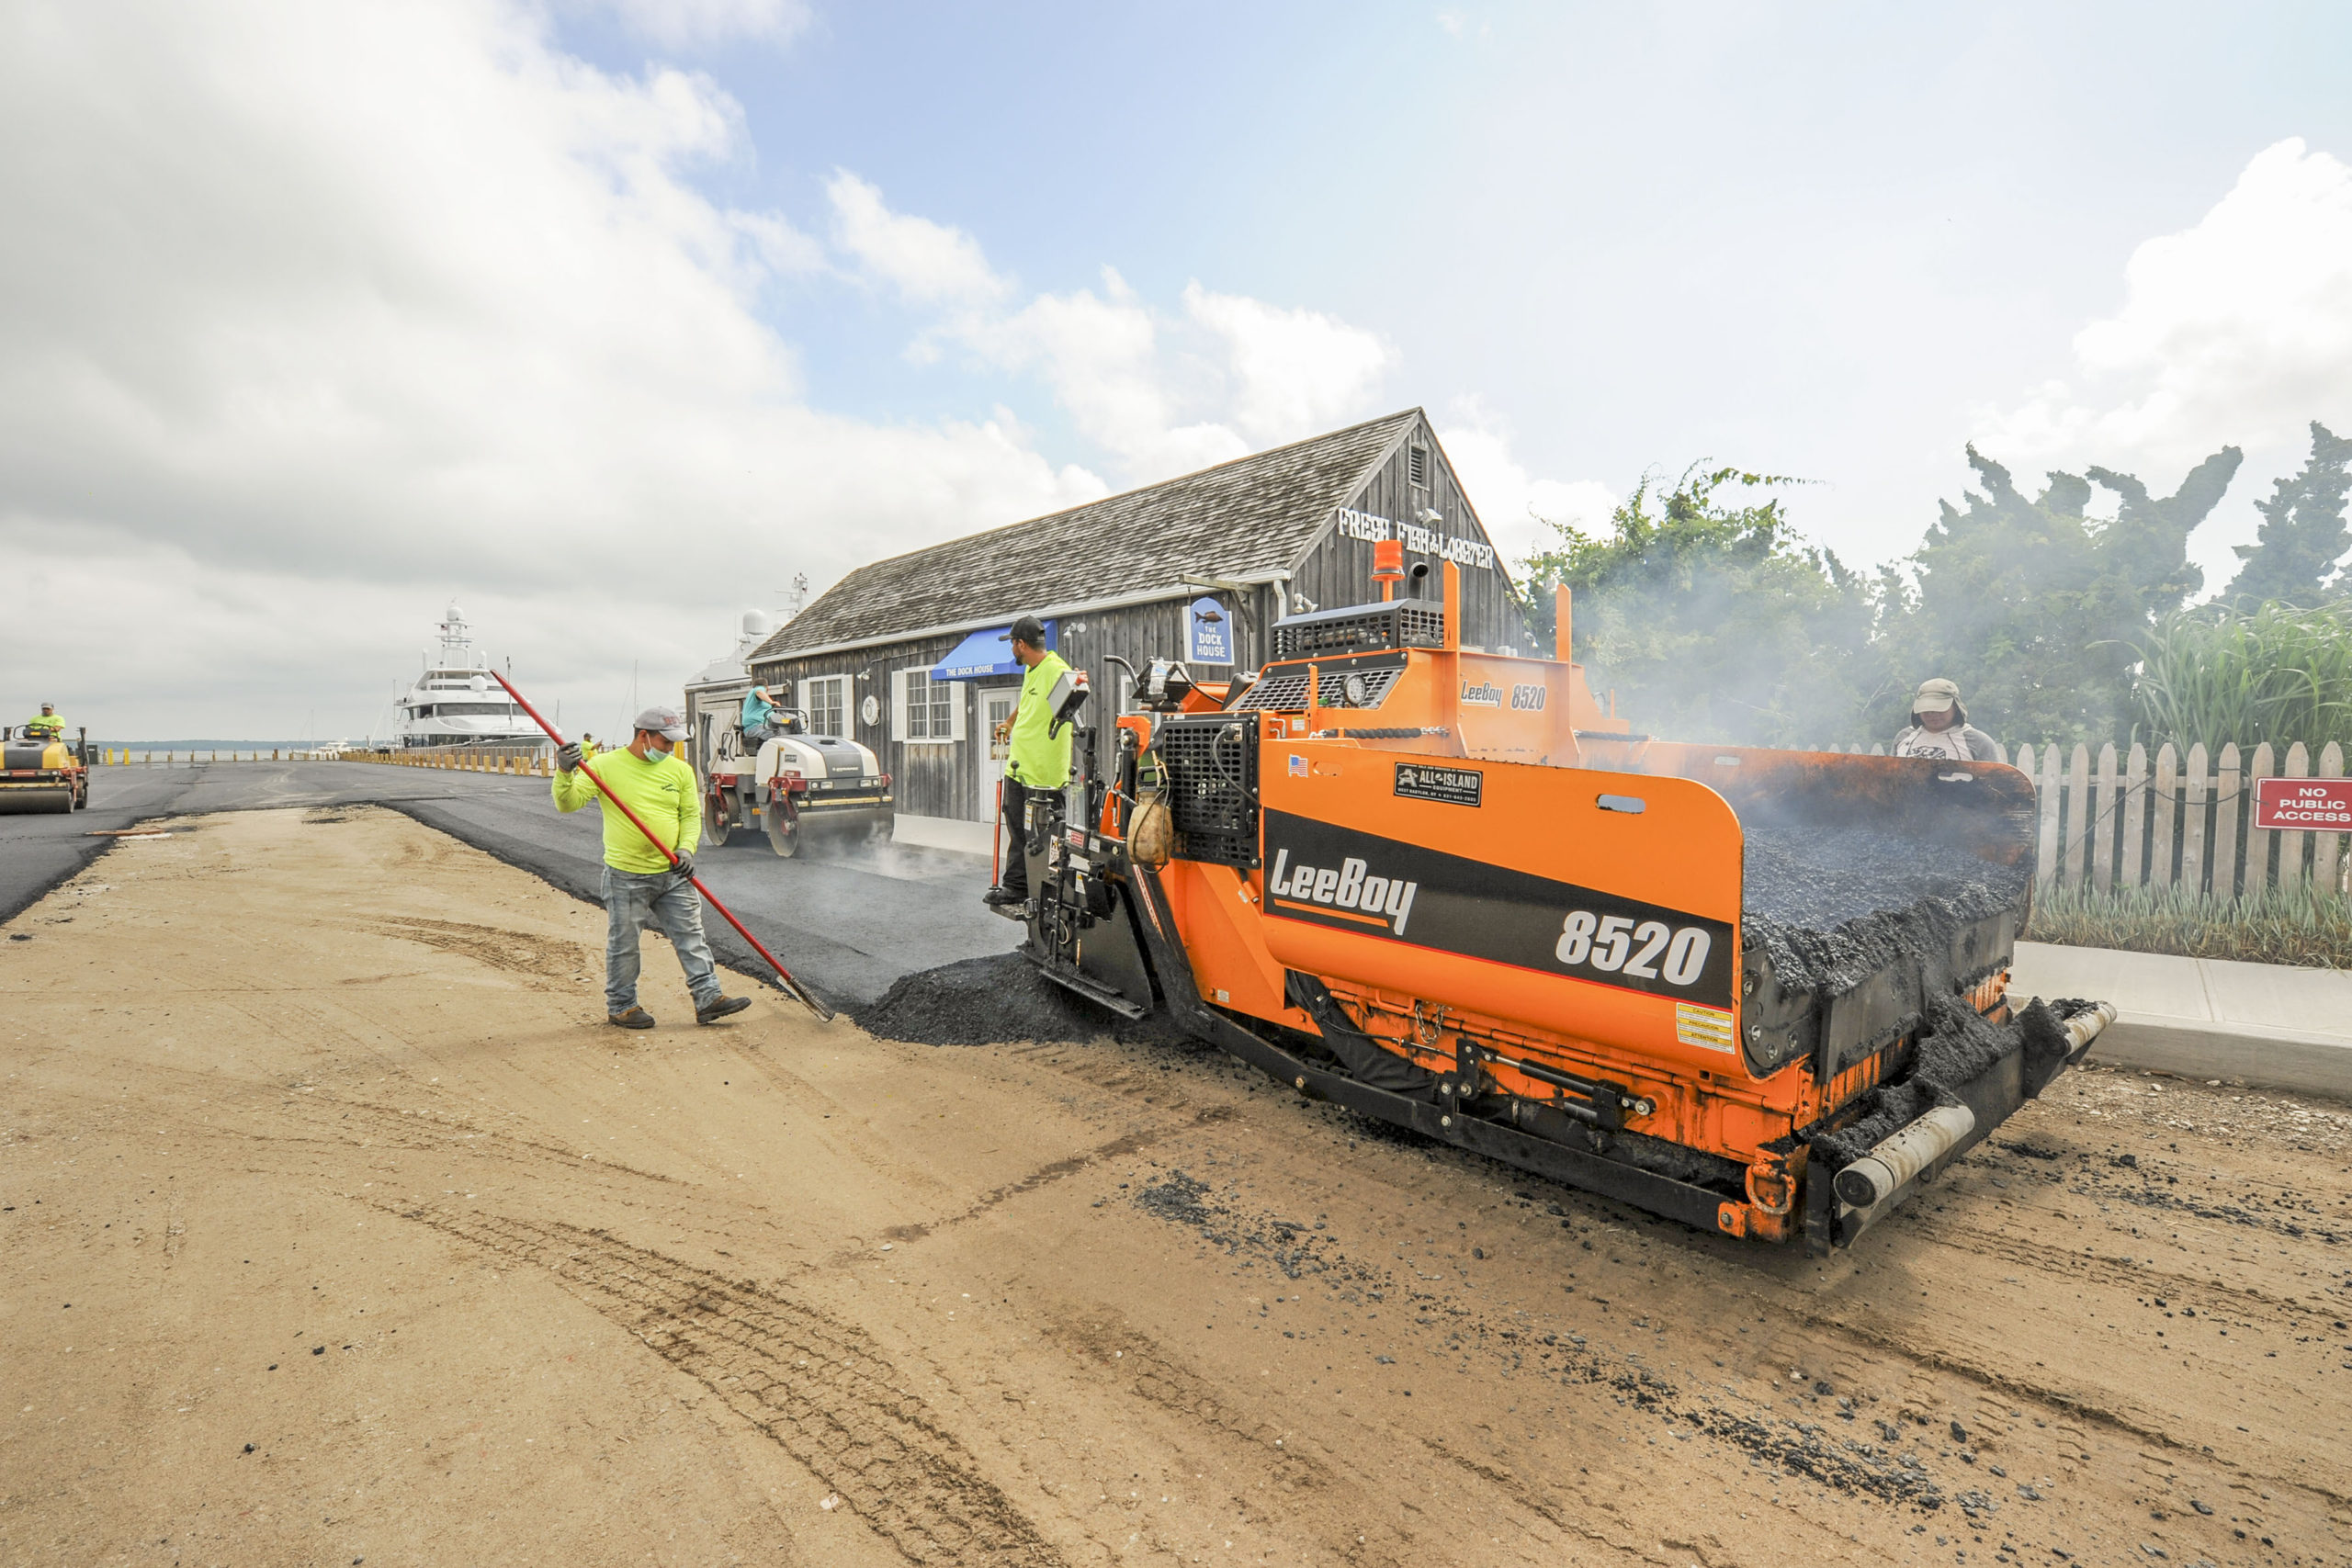 Workers were busy paving Long Wharf in Sag Harbor in anticipation of its reopening in time for the July 4 weekend. MICHAEL HELLER